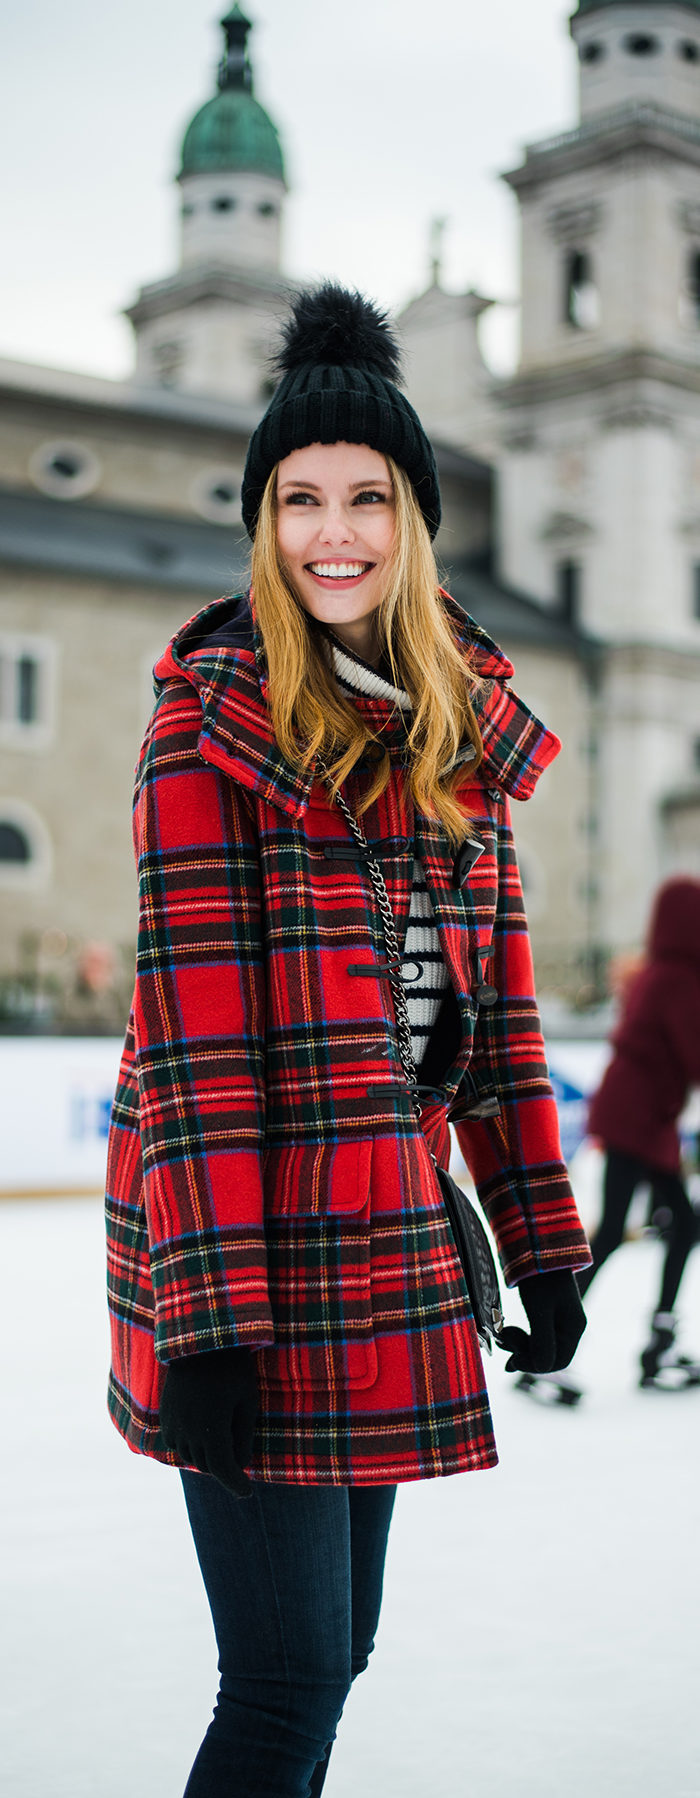 Alyssa Campanella of The A List blog sharing her favorite coats for fall and winter wearing Gloverall in Austria